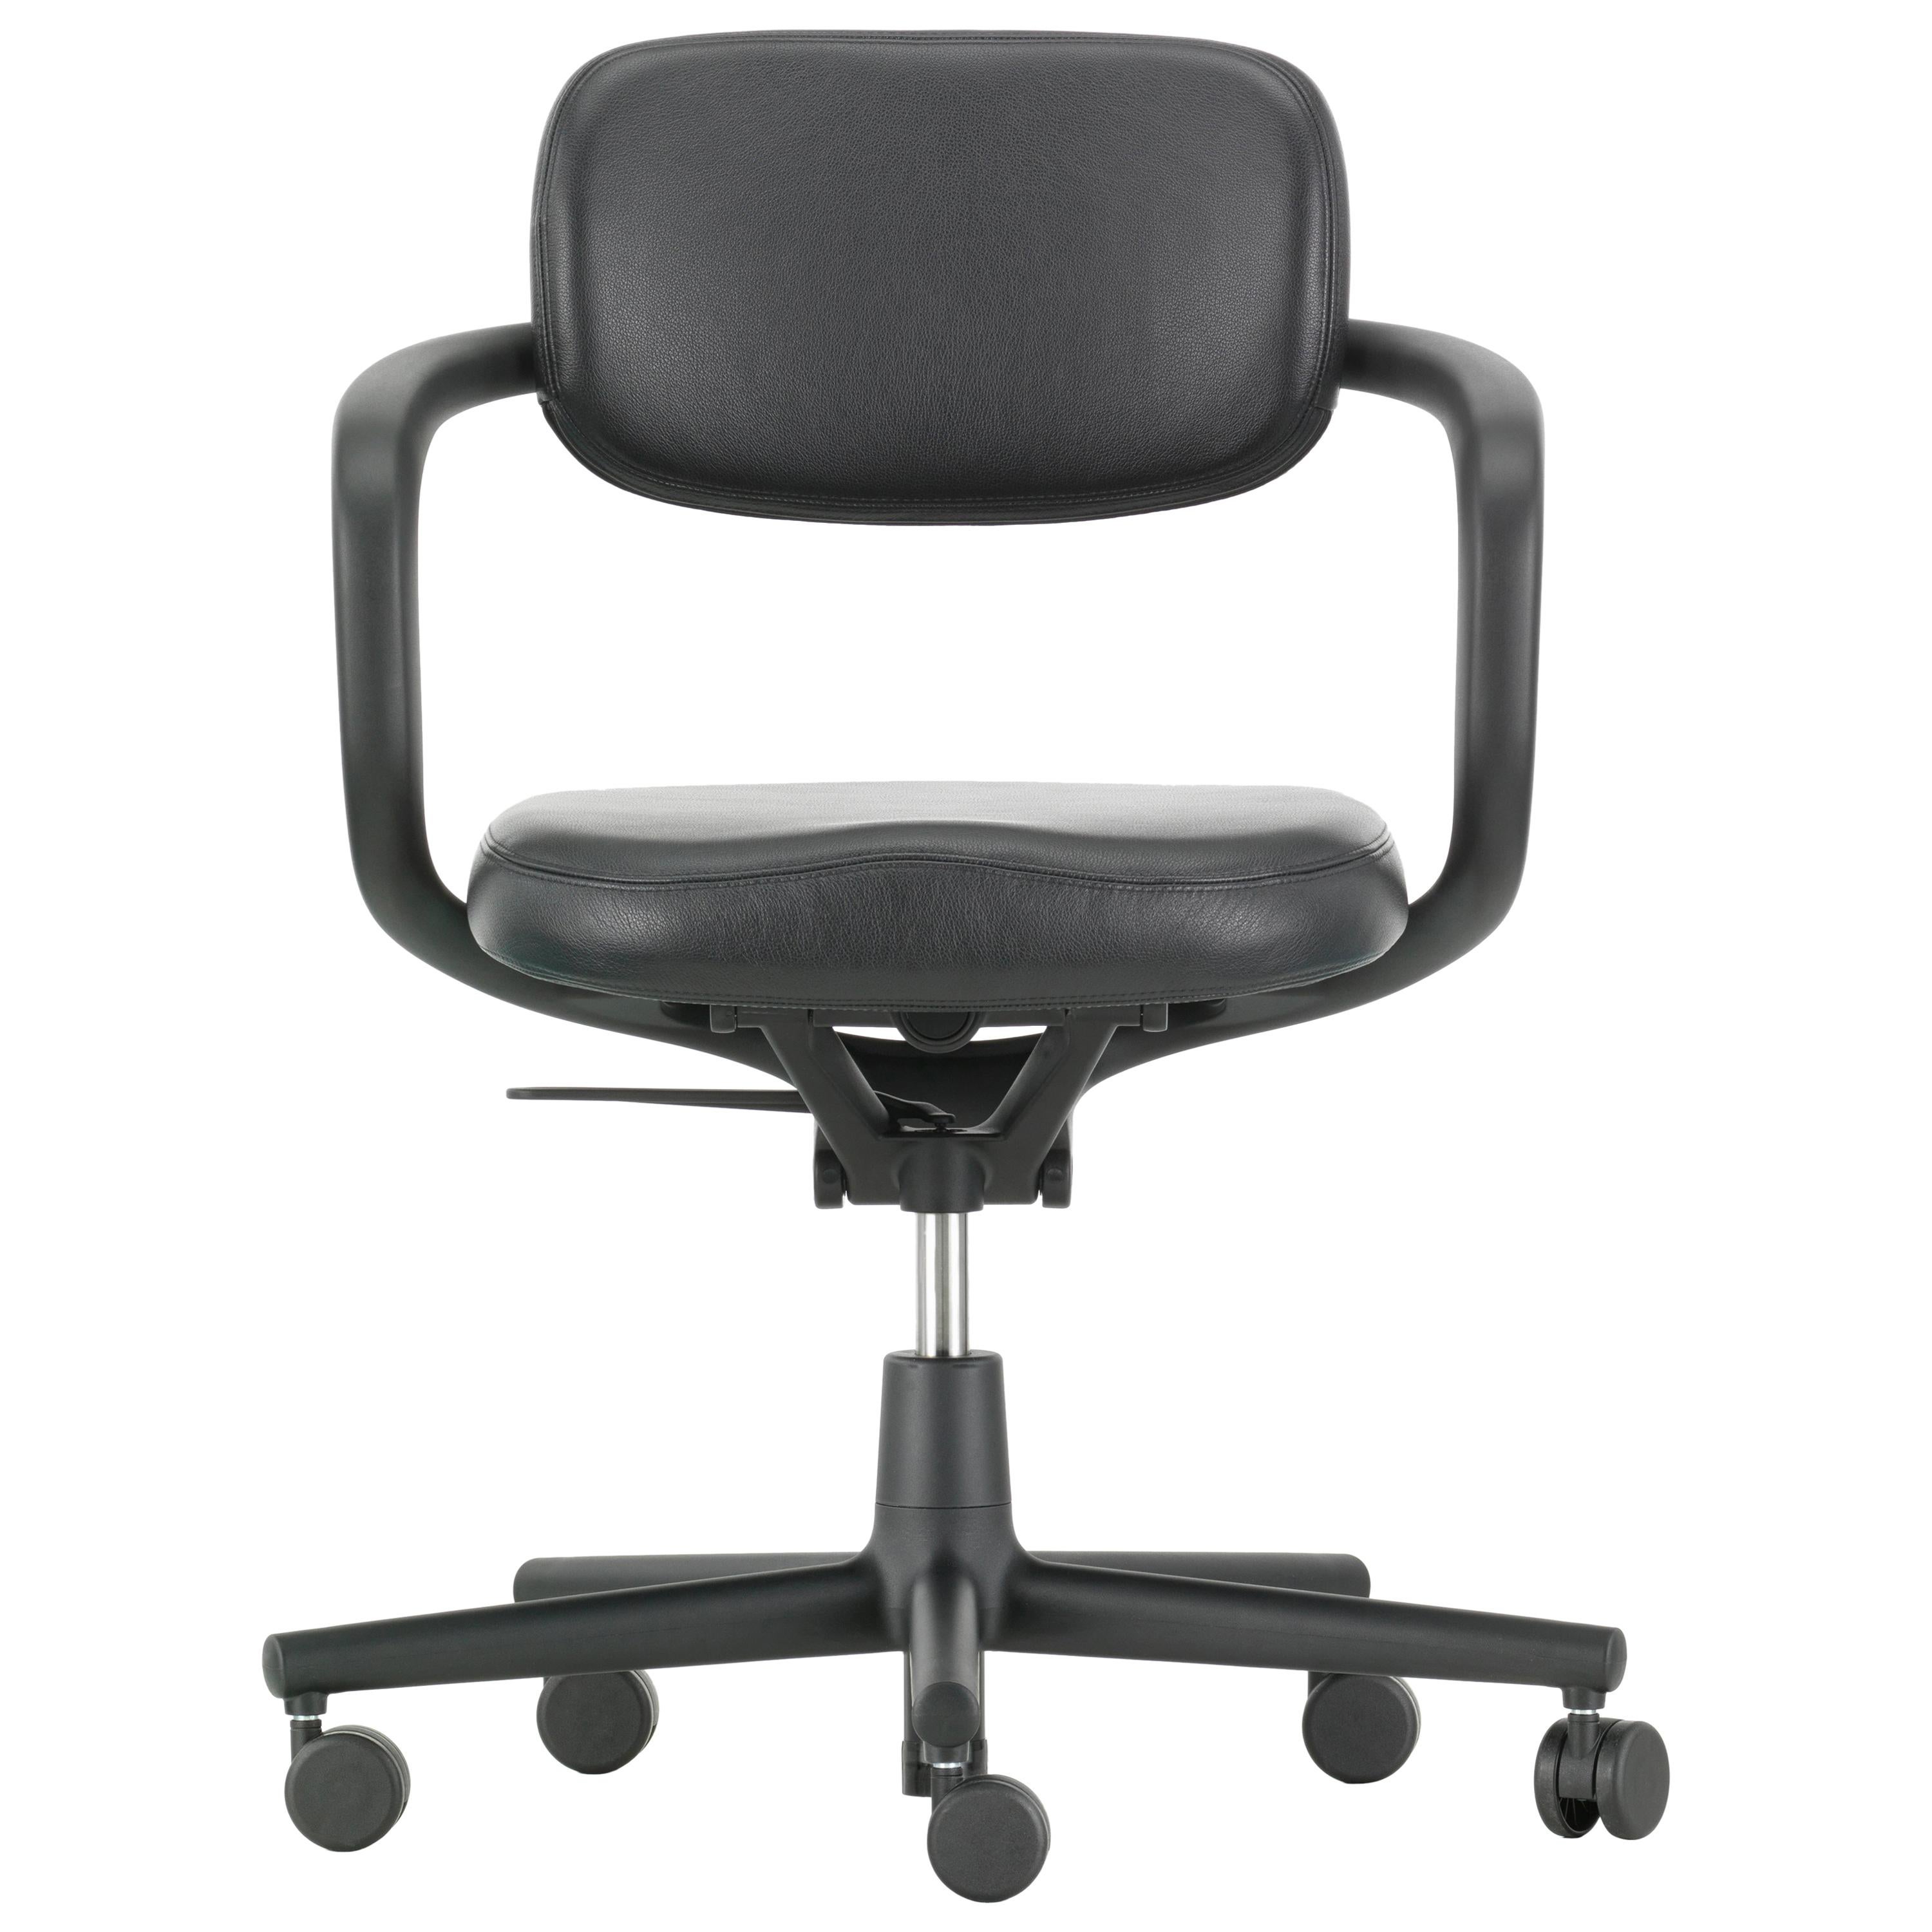 Vitra Allstar Chair in Nero Leather by Konstantin Grcic im Angebot